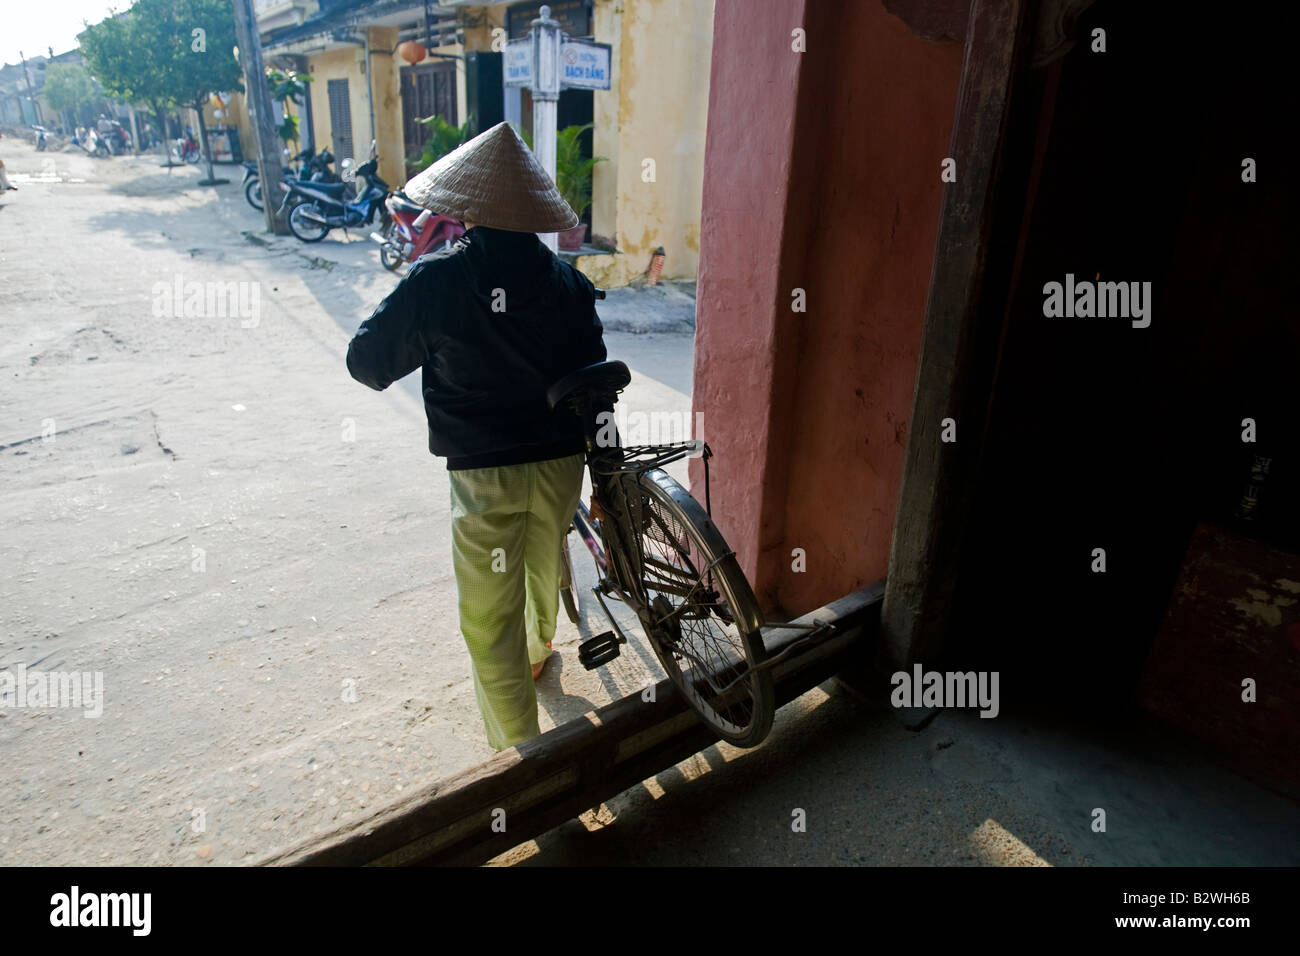 Conical hat woman with bicycle landmark Japanese Covered Bridge Hoi An Vietnam Stock Photo